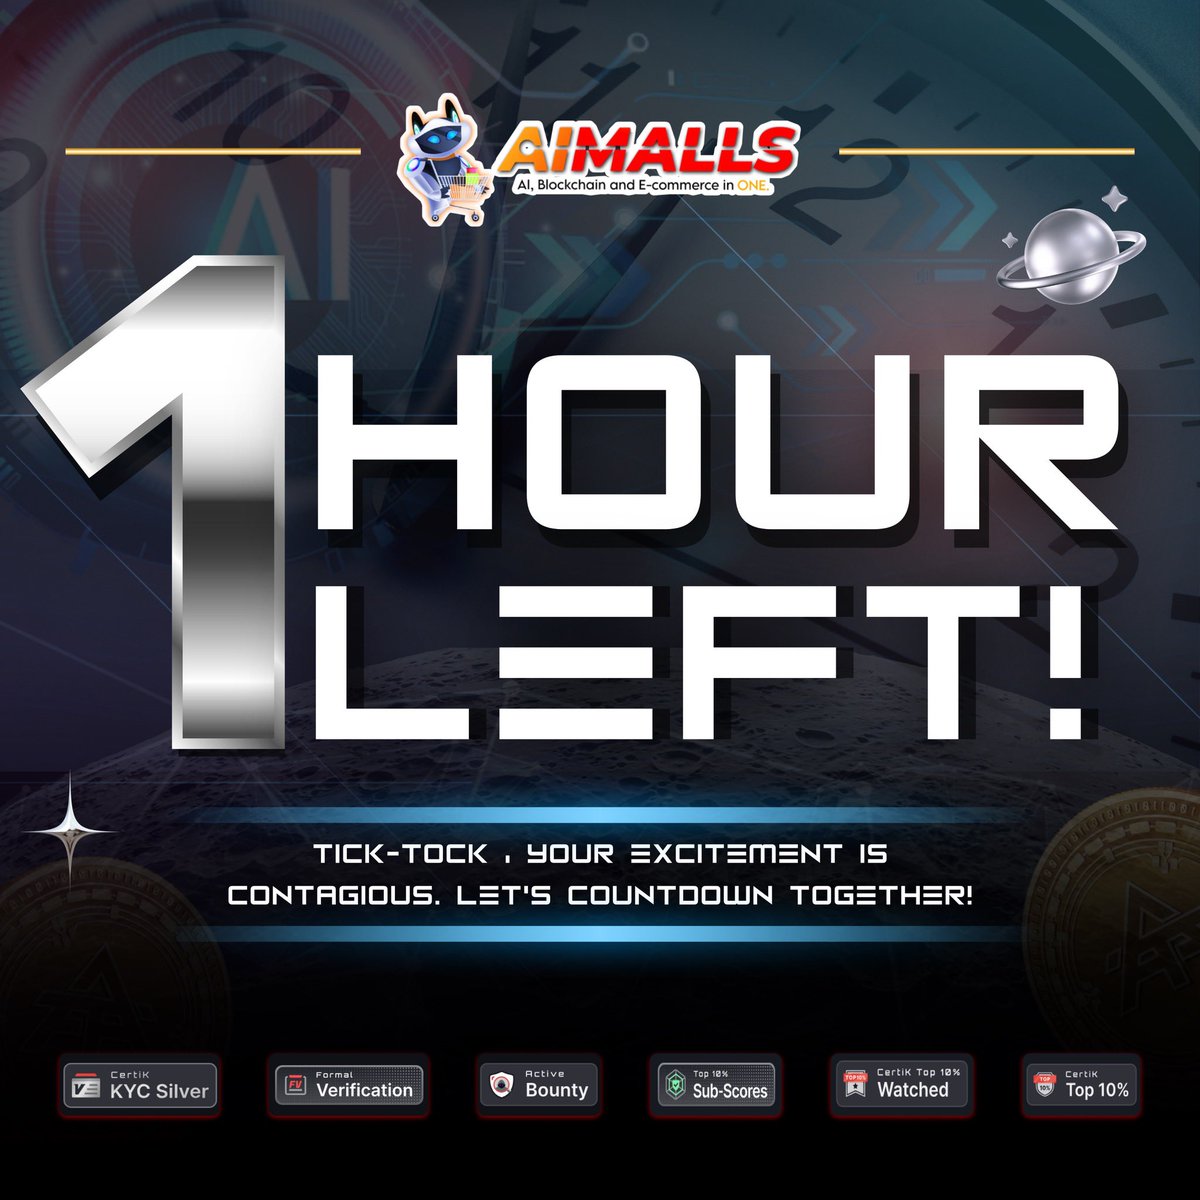 ⌚️Only 1 HOUR LEFT! Tick-tock⏰ , Your excitement is contagious. Let’s countdown together! Guess what? The community’s eagerly awaited revelation is just around the corner! #AiMalls #AIT #Countdown #1hourleft #Innovation #Defi #Ecommerce $AIT🚀